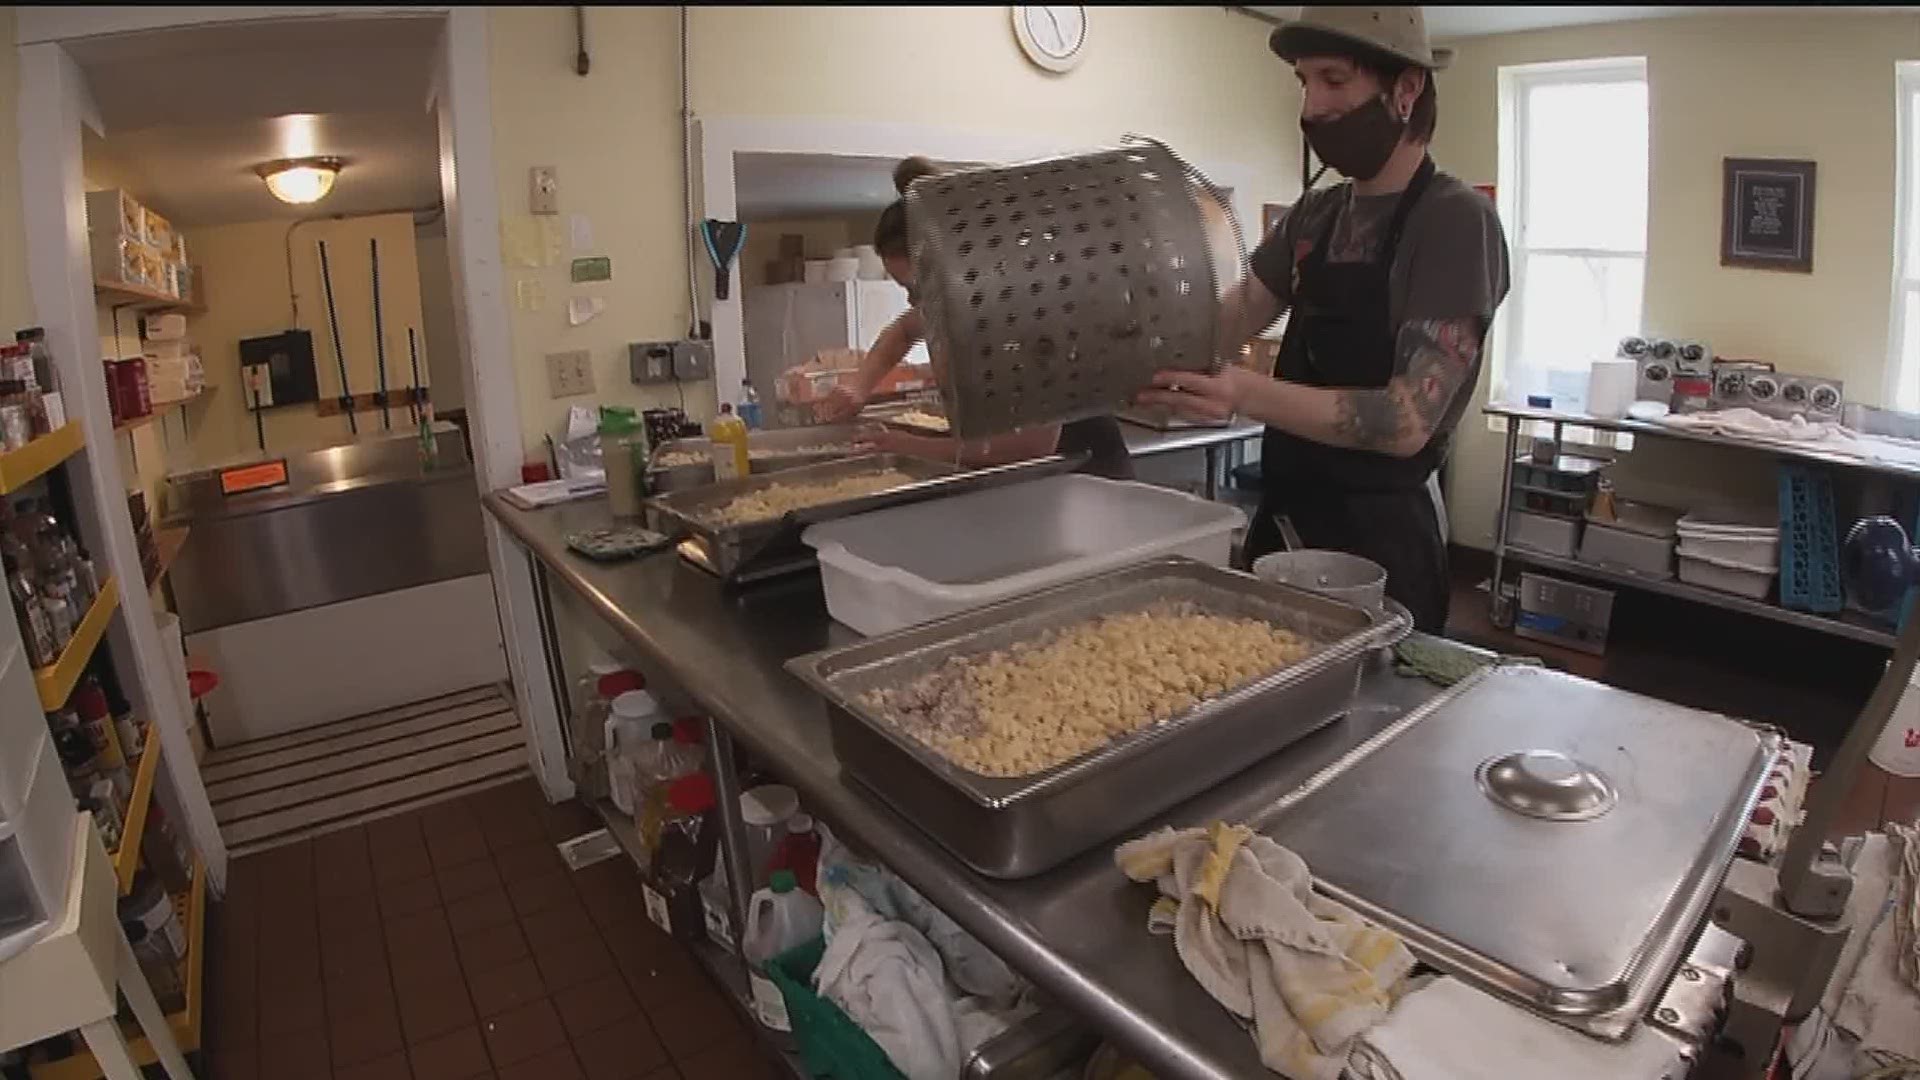 Cafe on Vine has had to serve 100 meals more each day to feed the QC homeless population staying in nearby hotels.